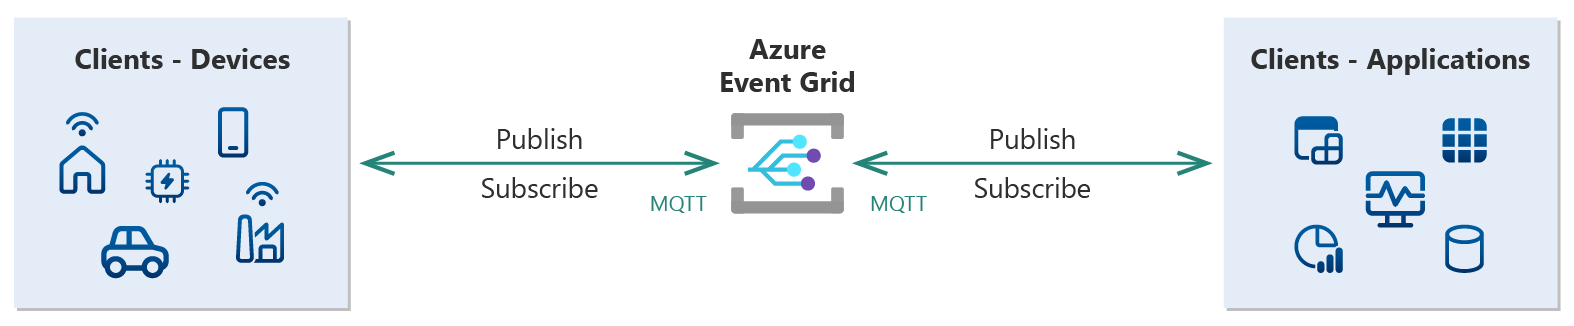 High-level diagram of Event Grid that shows bidirectional MQTT communication with publisher and subscriber clients.